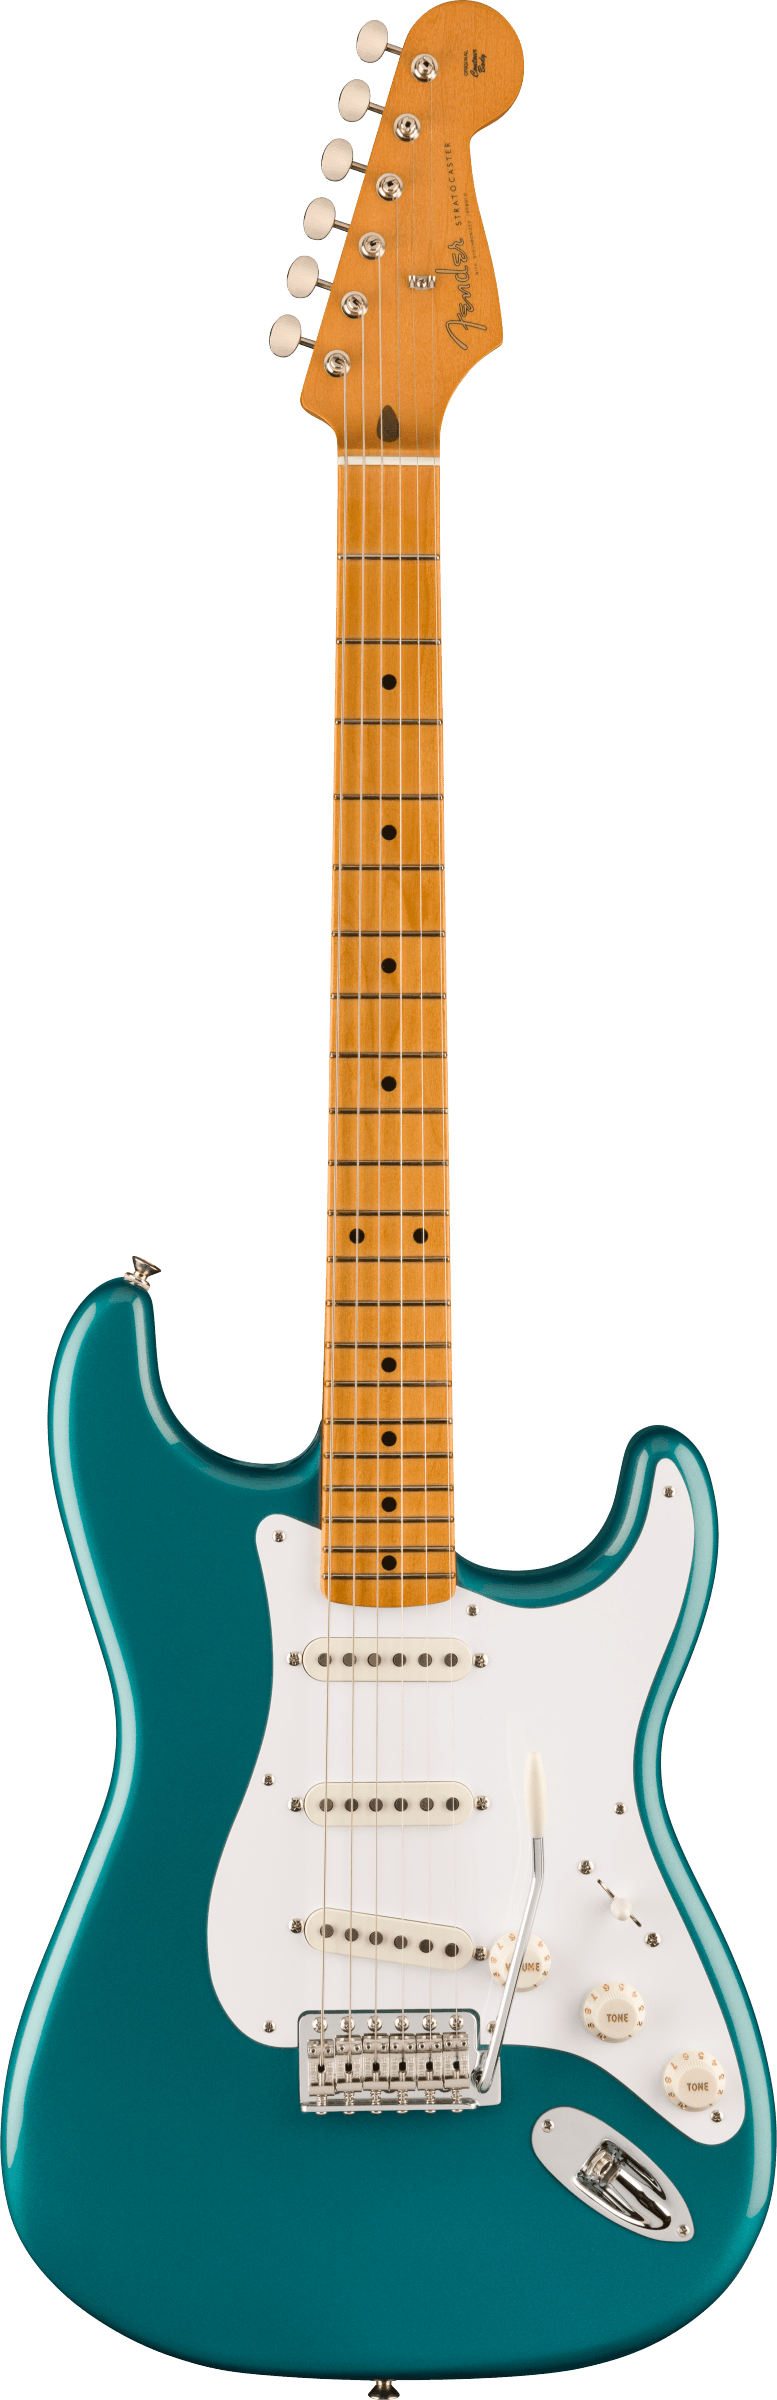 Fender Vintera II 50s Stratocaster Electric Guitar, Ocean Turquoise, Maple (NEW)